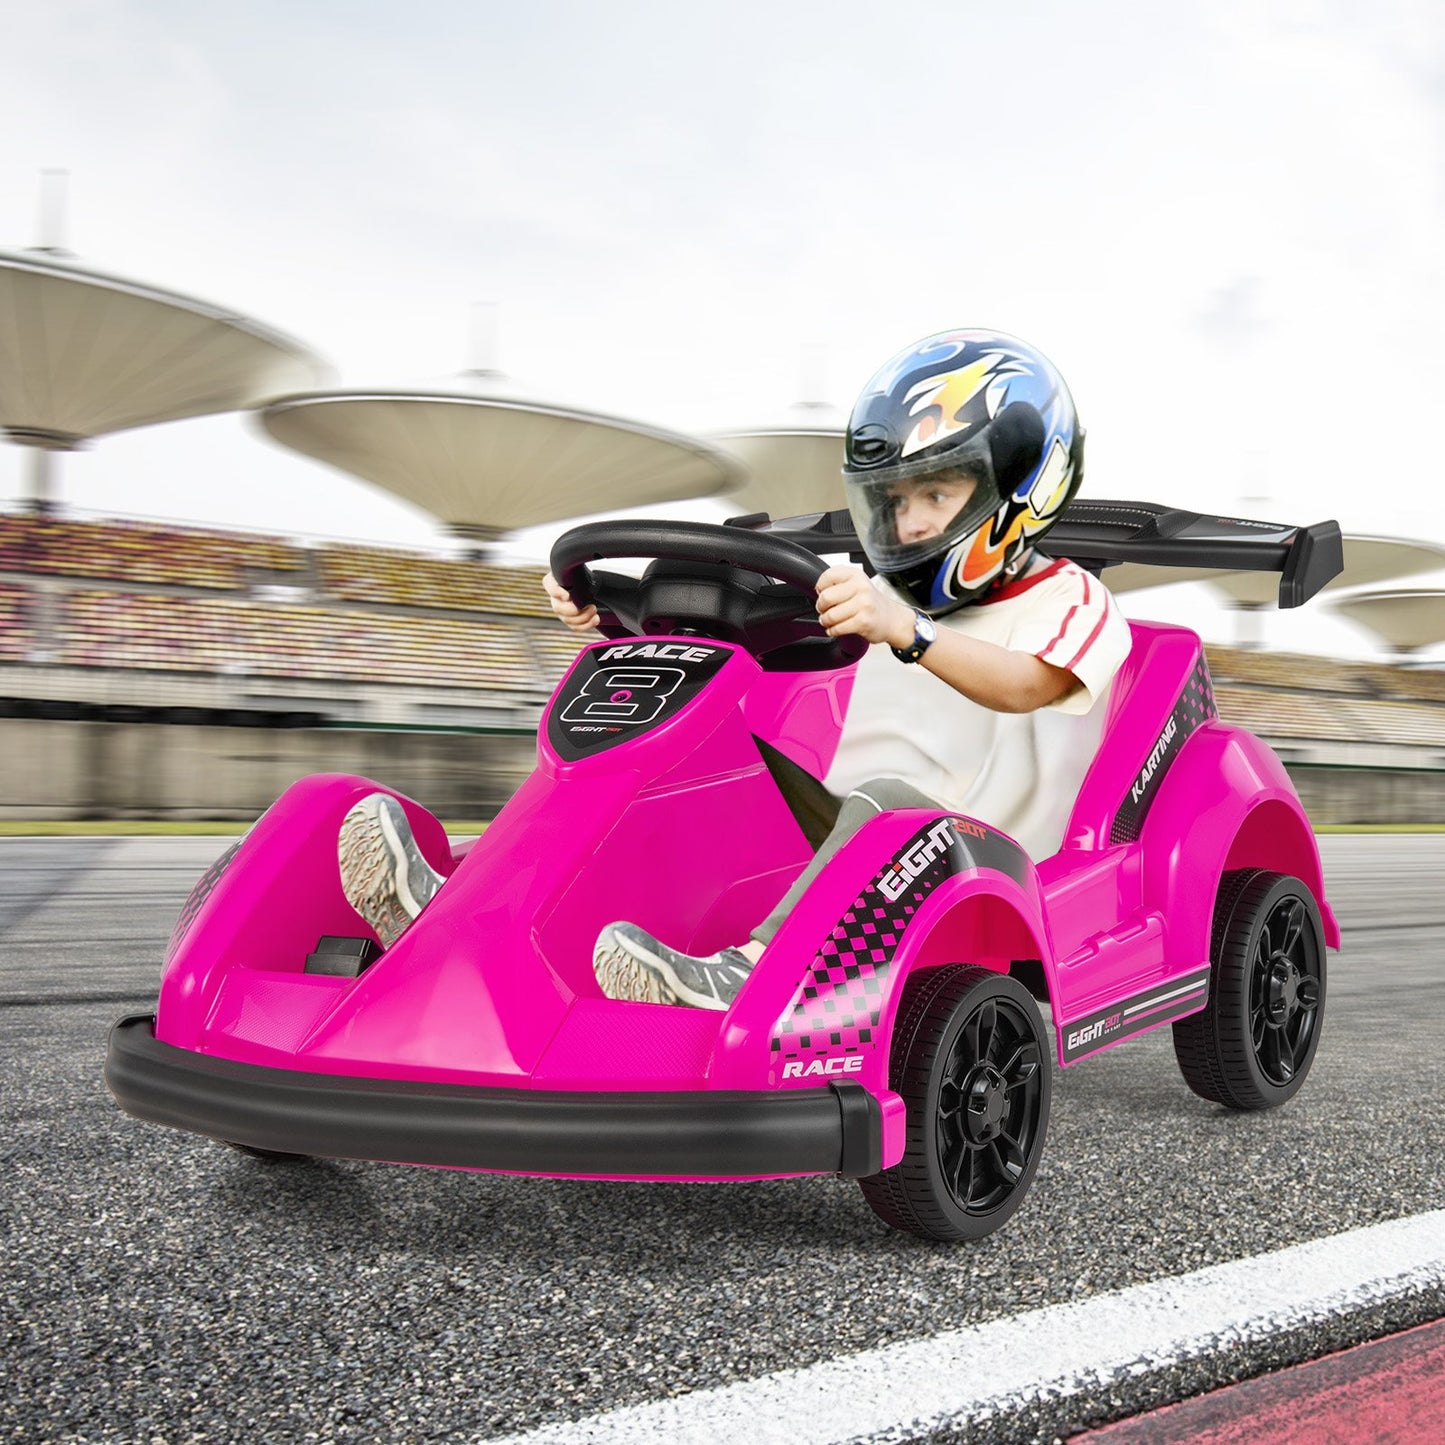 6V Kids Ride On Go Cart with Remote Control and Safety Belt, Pink